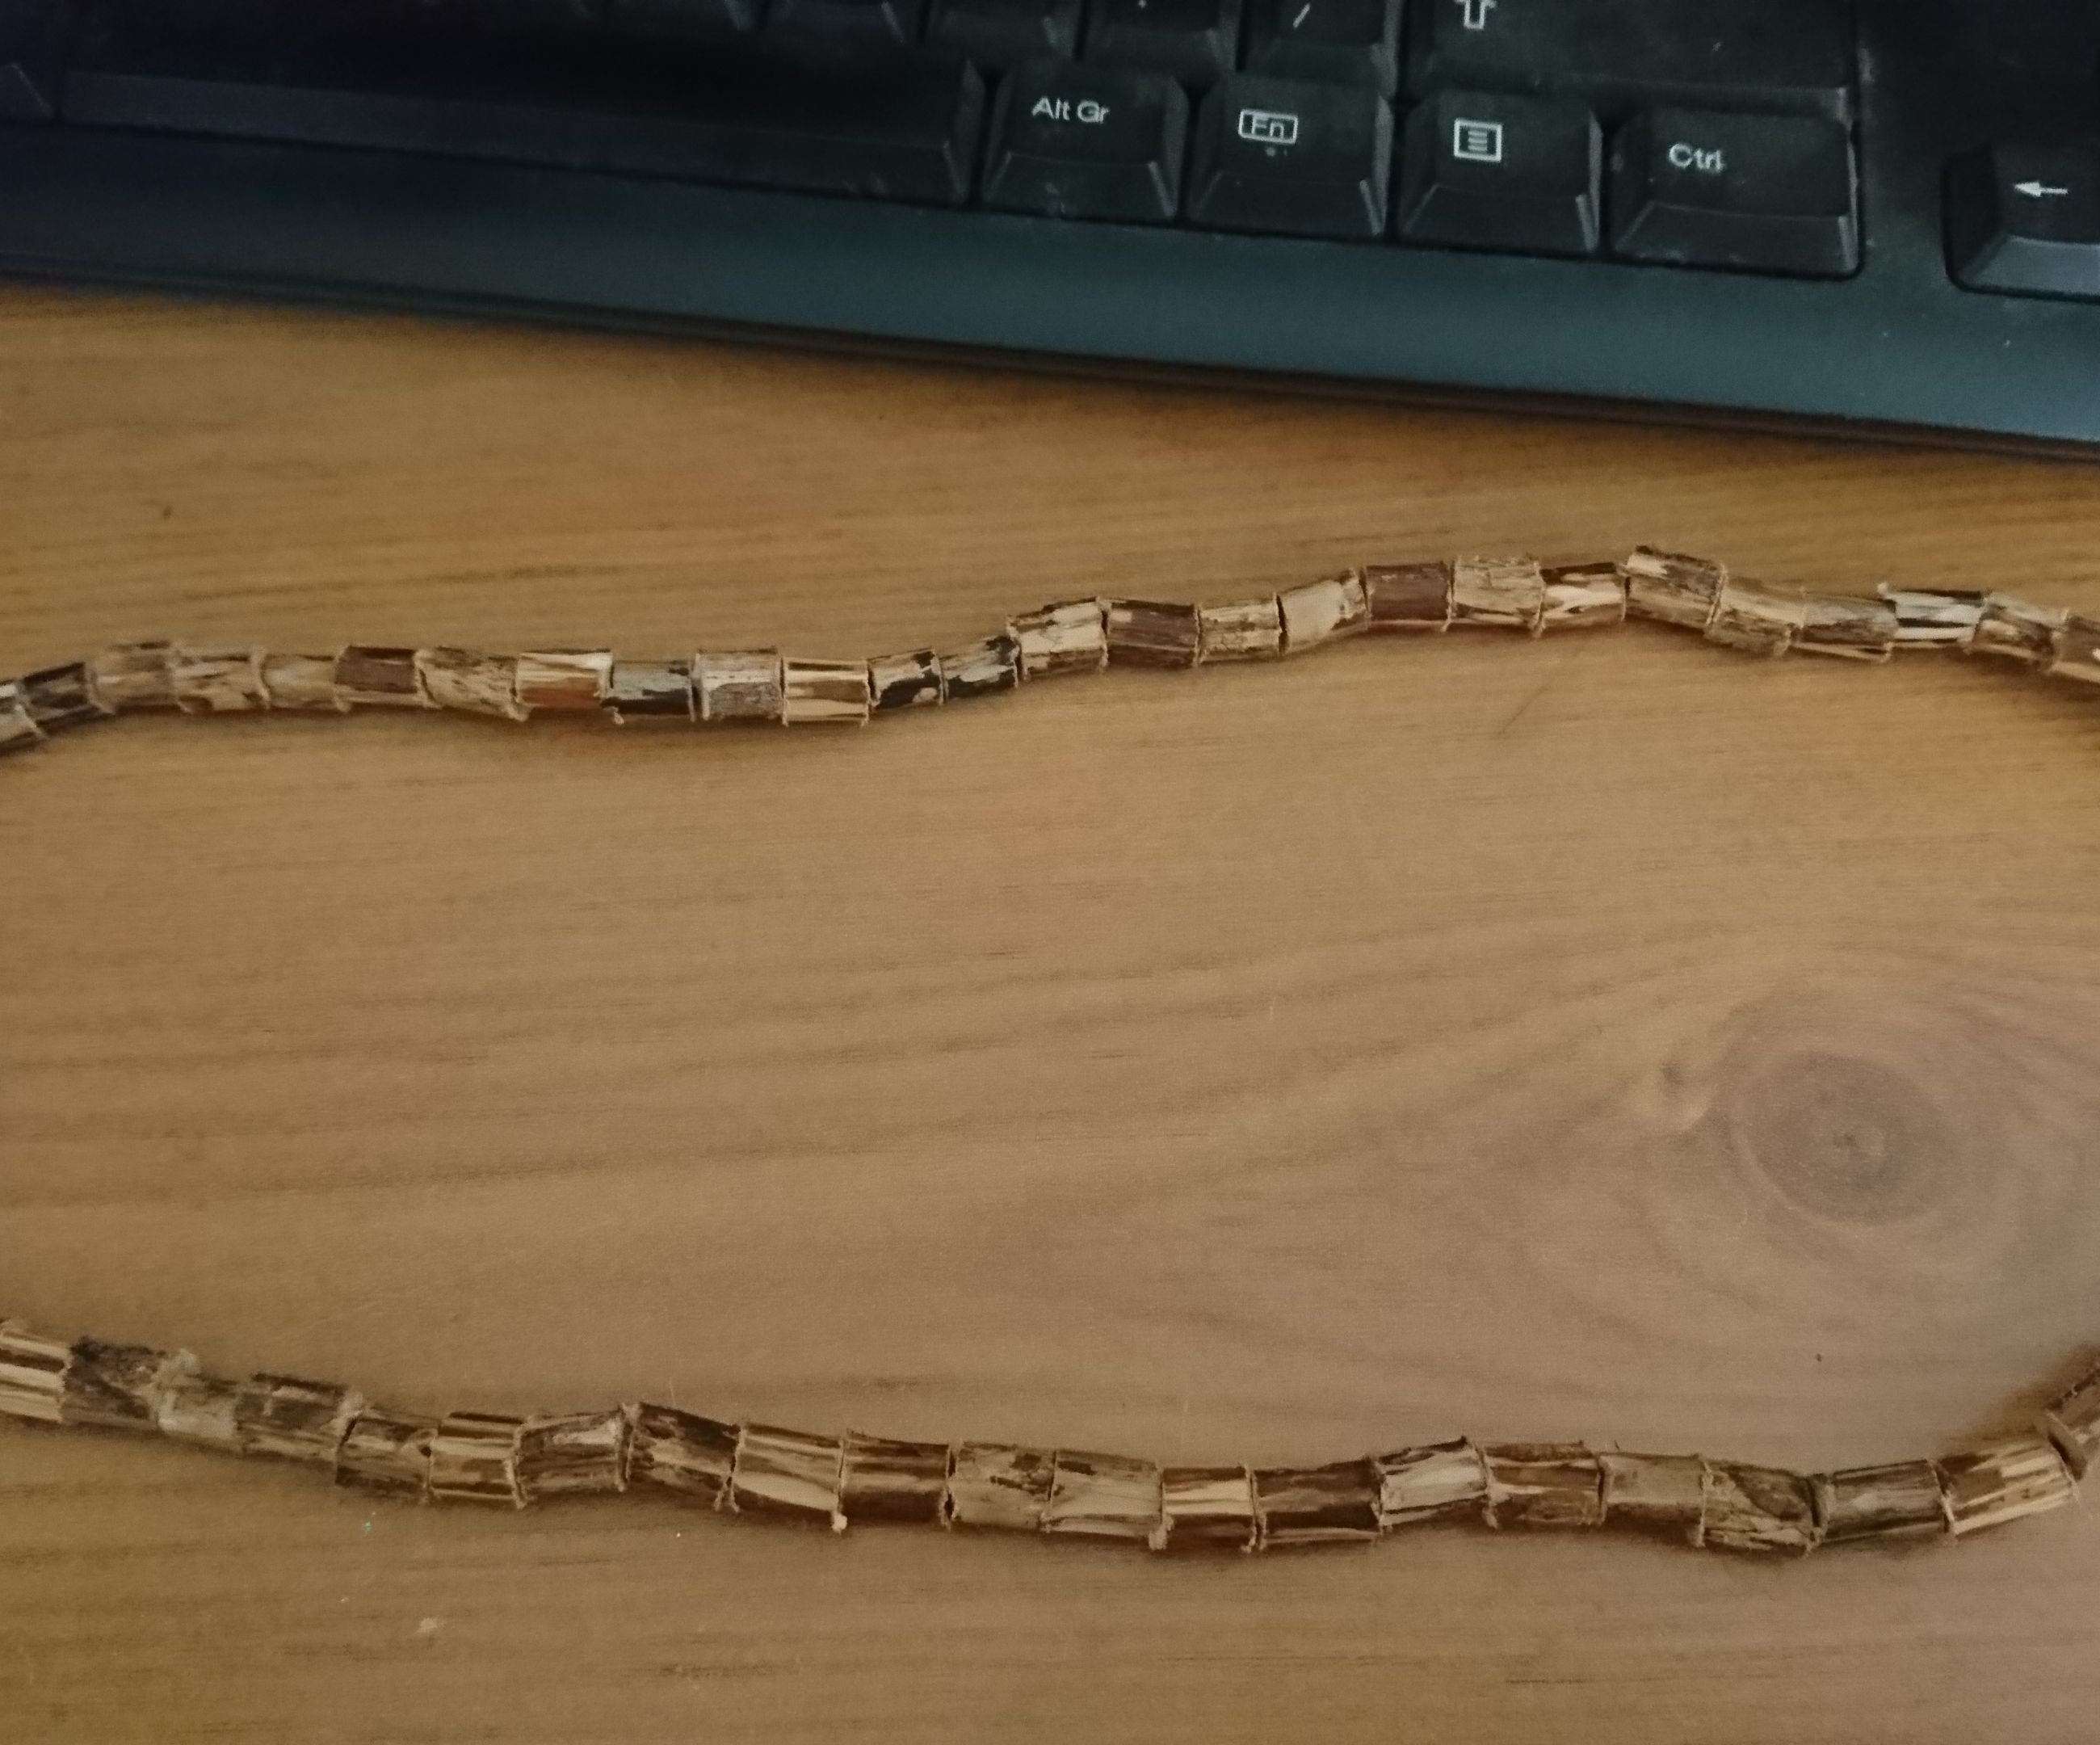 How to Make a Necklace From a Stick 